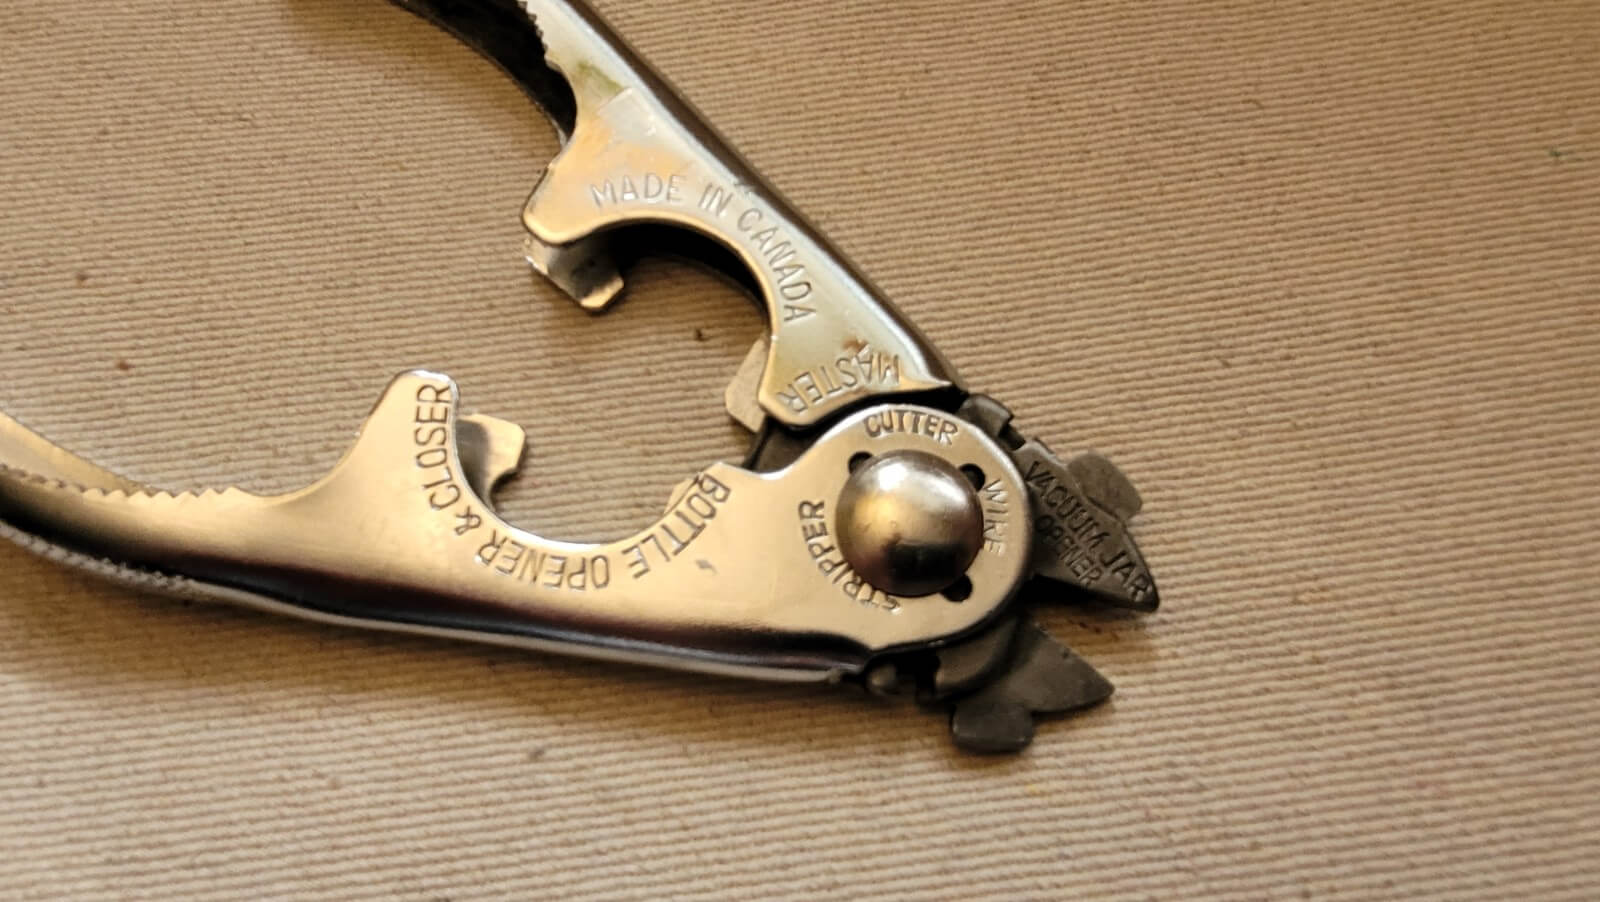 Vintage Master Bottle Opener and Closer Multitool Made in Canada - Rare Collectible Kitchenware and Canadiana Tool with Wire Cutters and Strippers, and Vacuum Jar & Bottle Opener / Closer